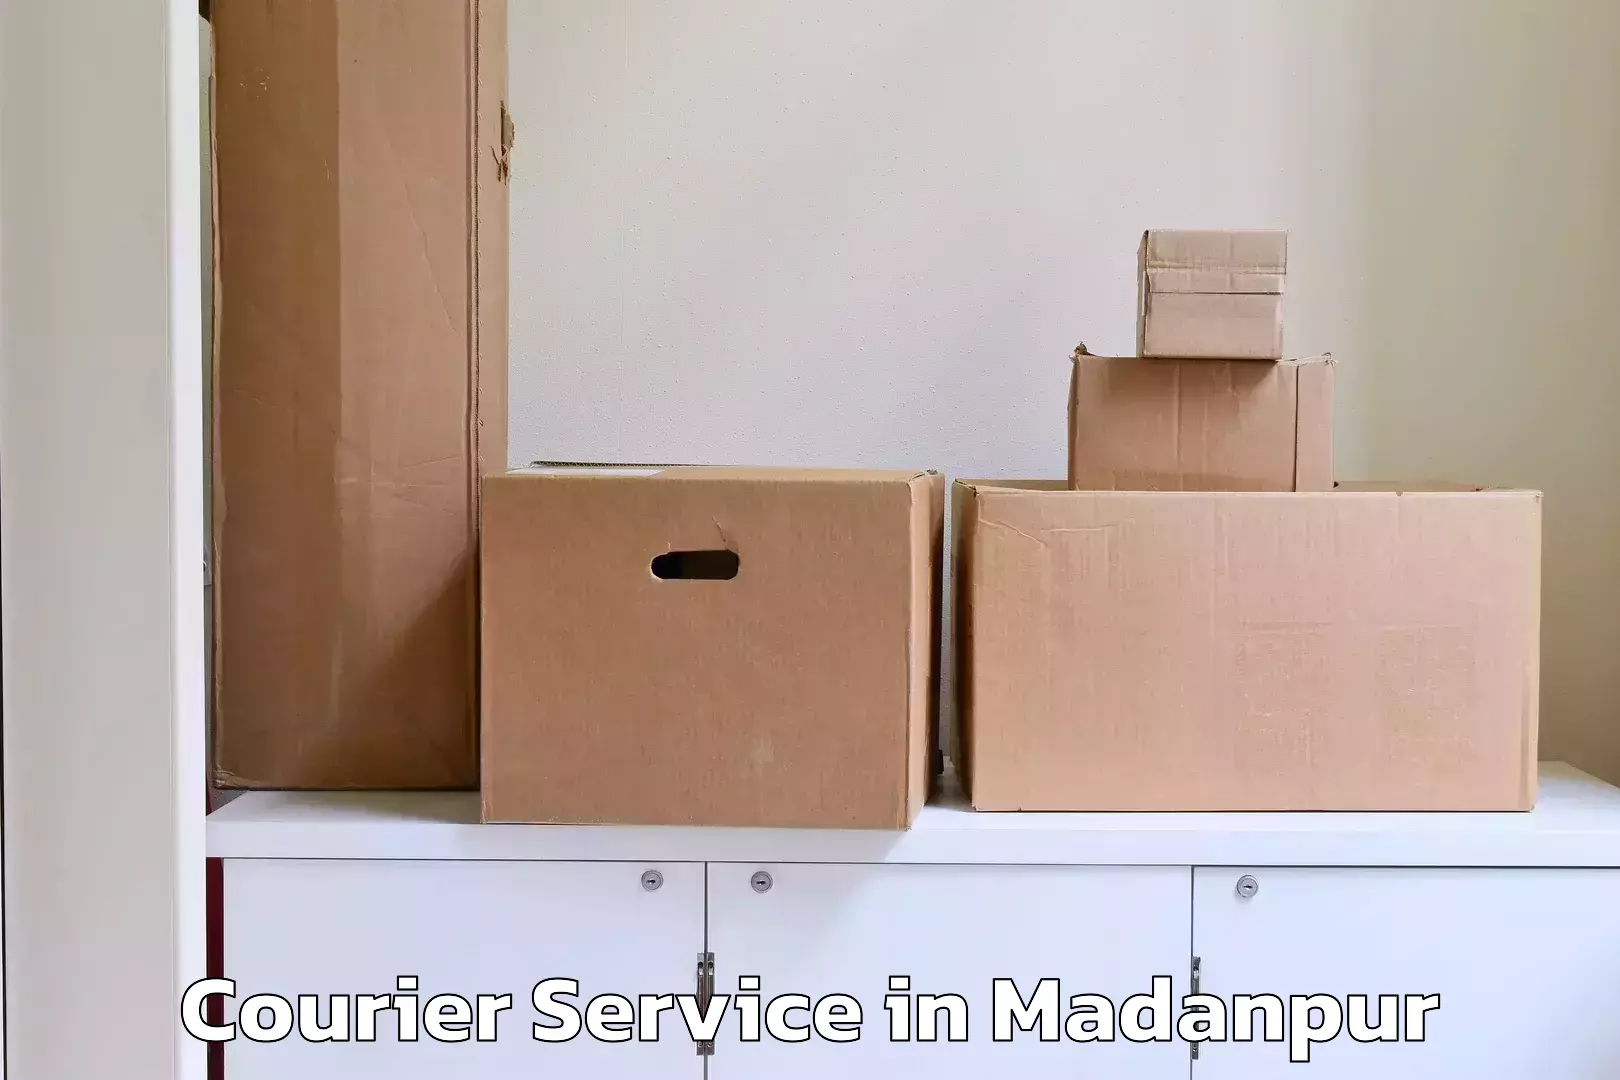 State-of-the-art courier technology in Madanpur